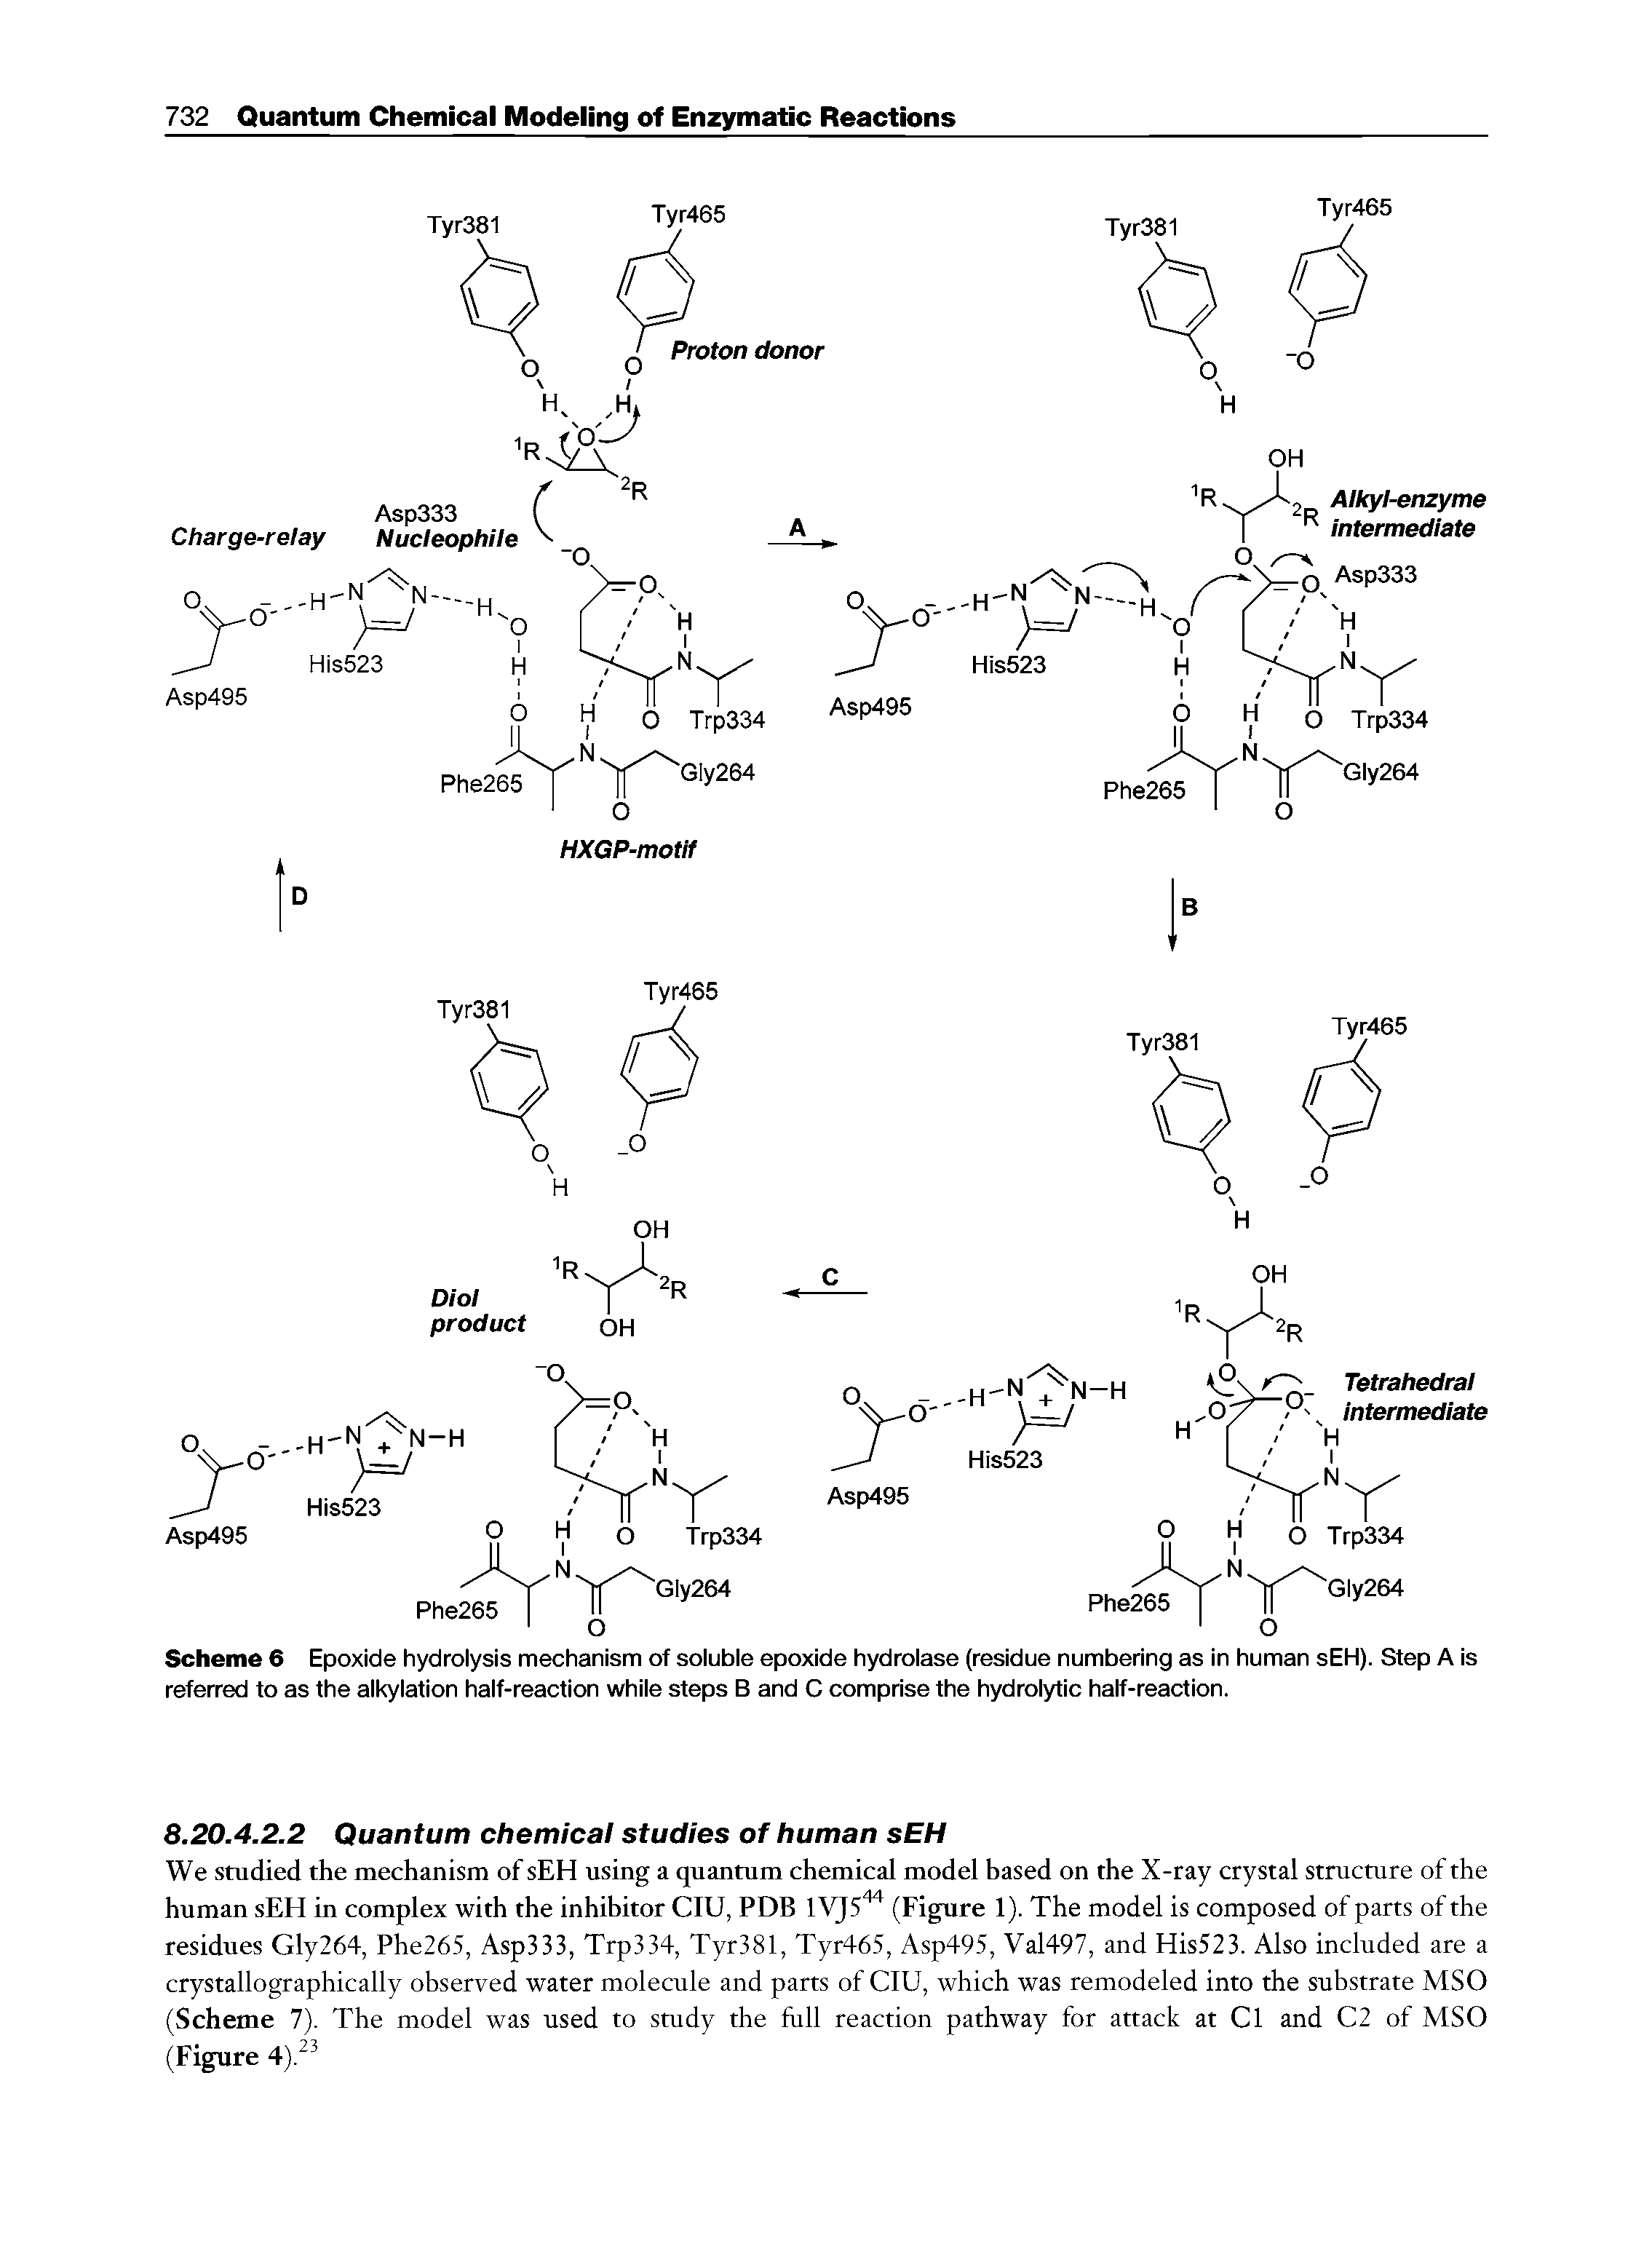 Scheme 6 Epoxide hydrolysis mechanism of soluble epoxide hydrolase (residue numbering as in human sEH). Step A is referred to as the alkylation half-reaction while steps B and C comprise the hydrolytic half-reaction.